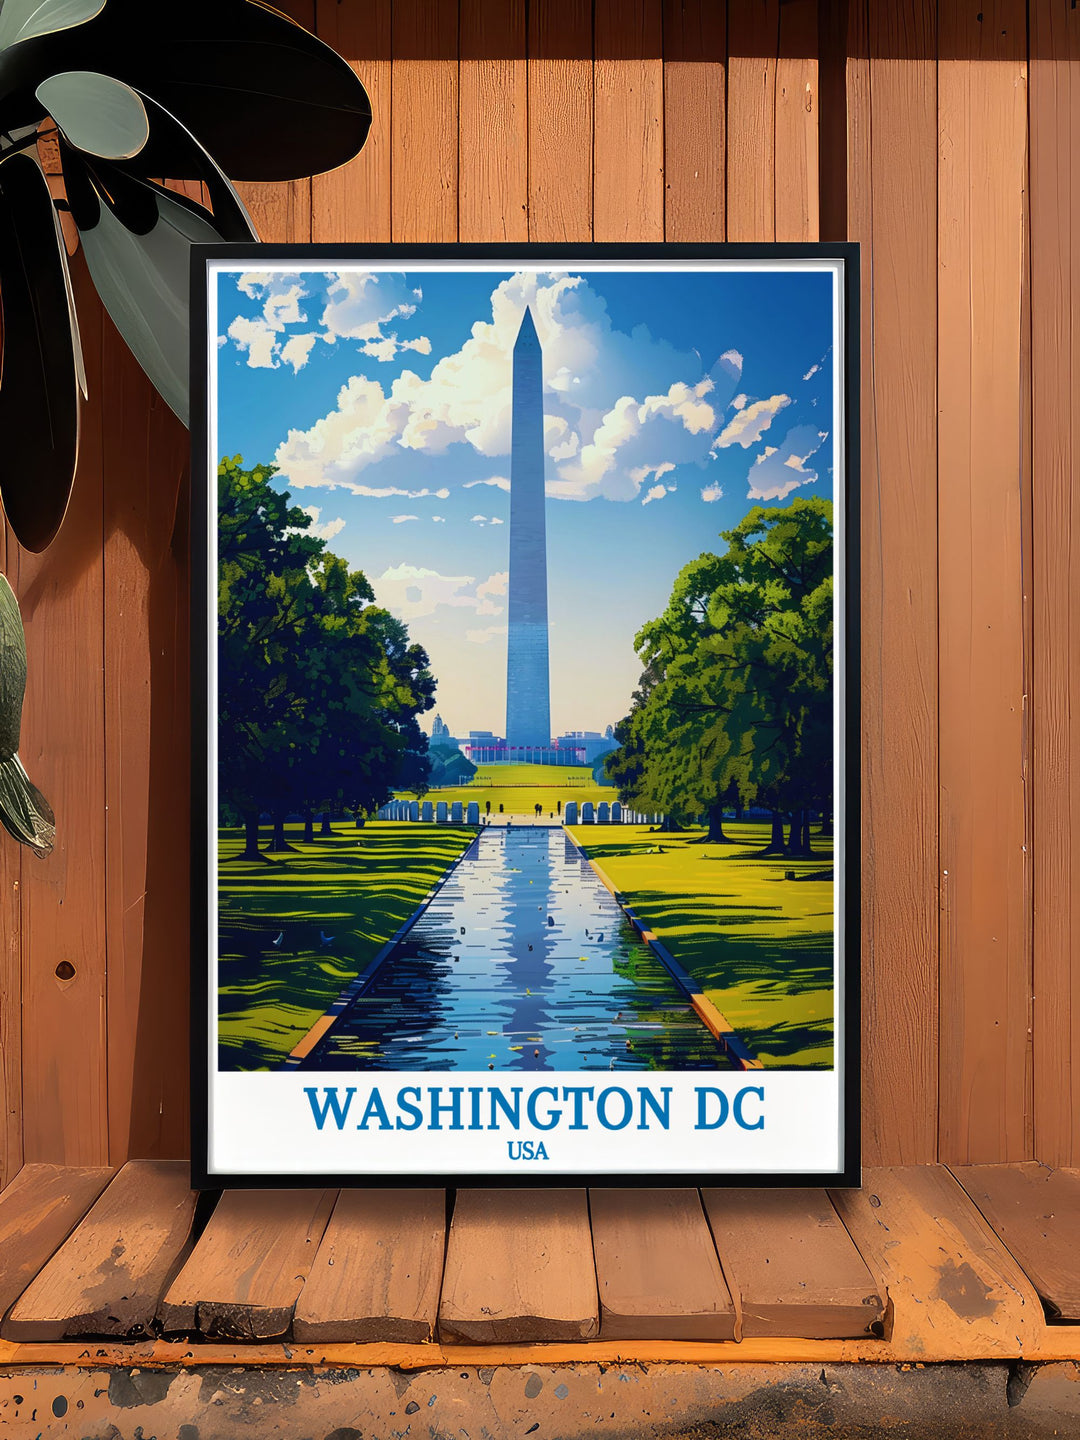 Stunning Washington DC poster of the Washington Monument captured in a vintage black and white design perfect for enhancing any interior decor